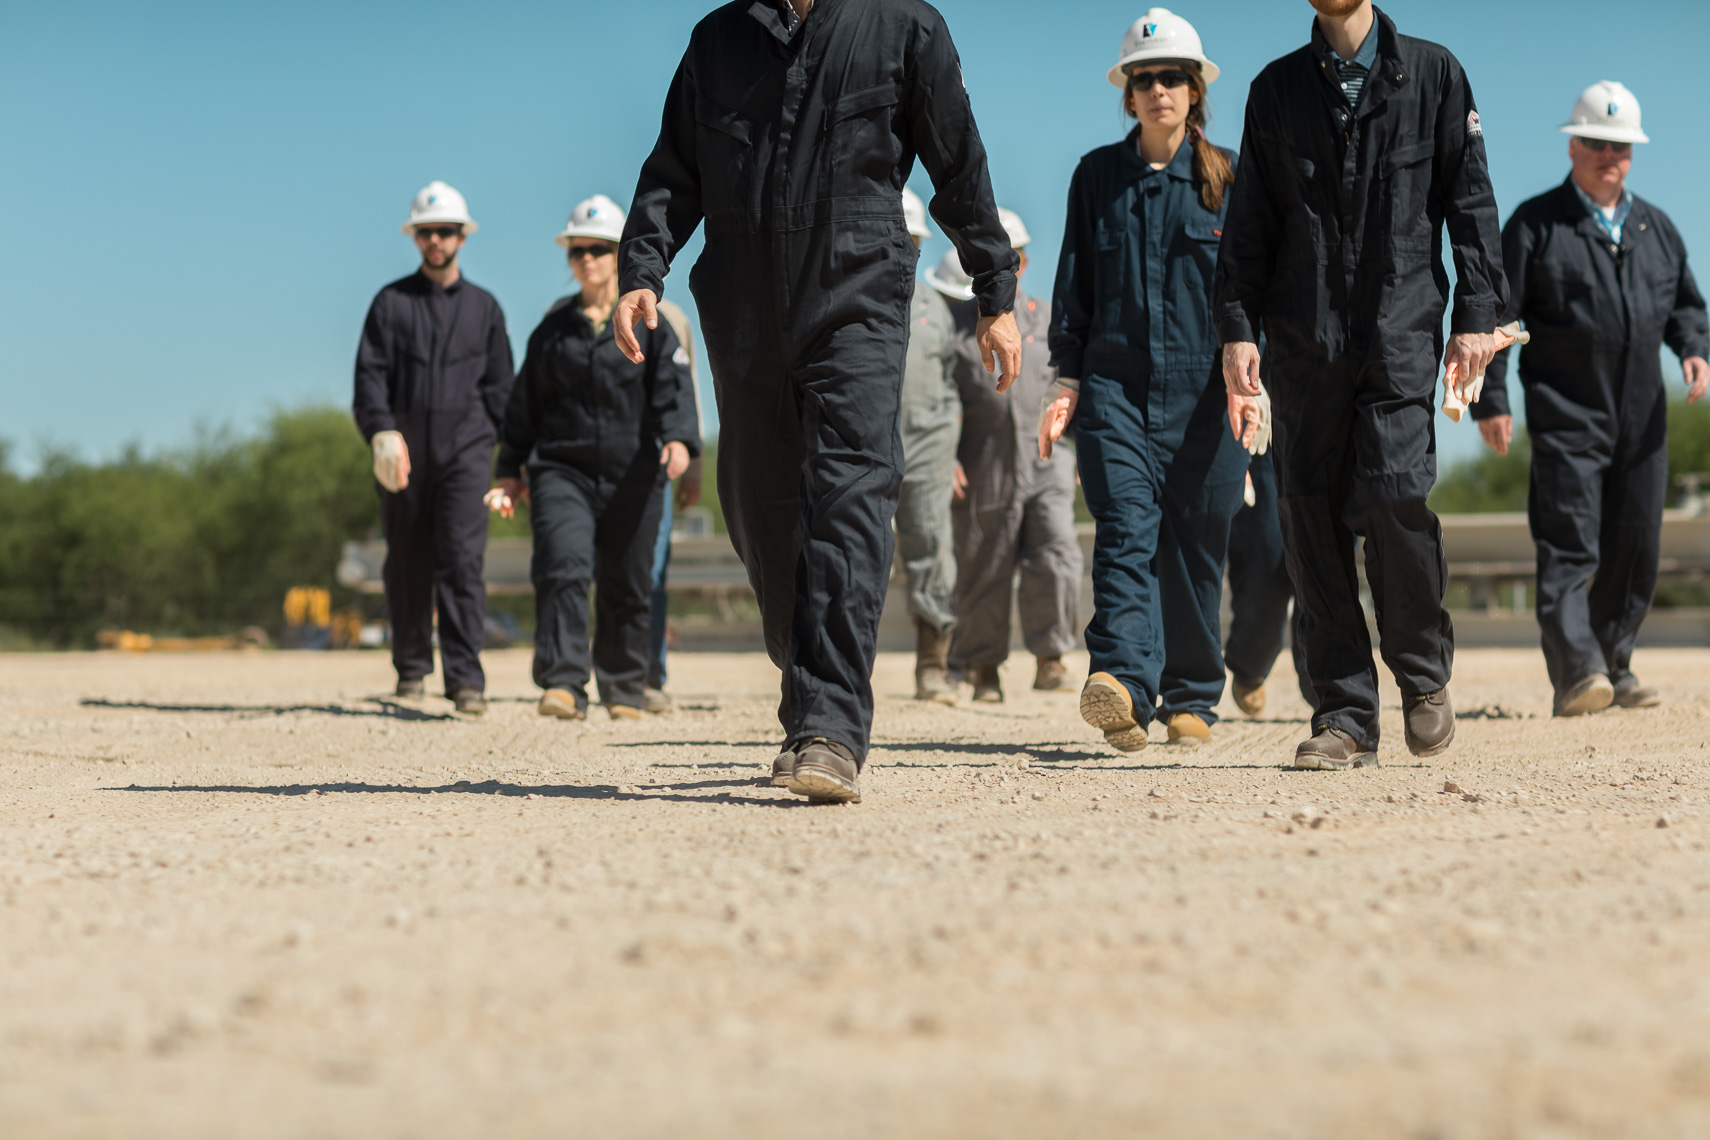 Group Of Oil & Gas Site Visitors Walking - Photo By Jason Risner